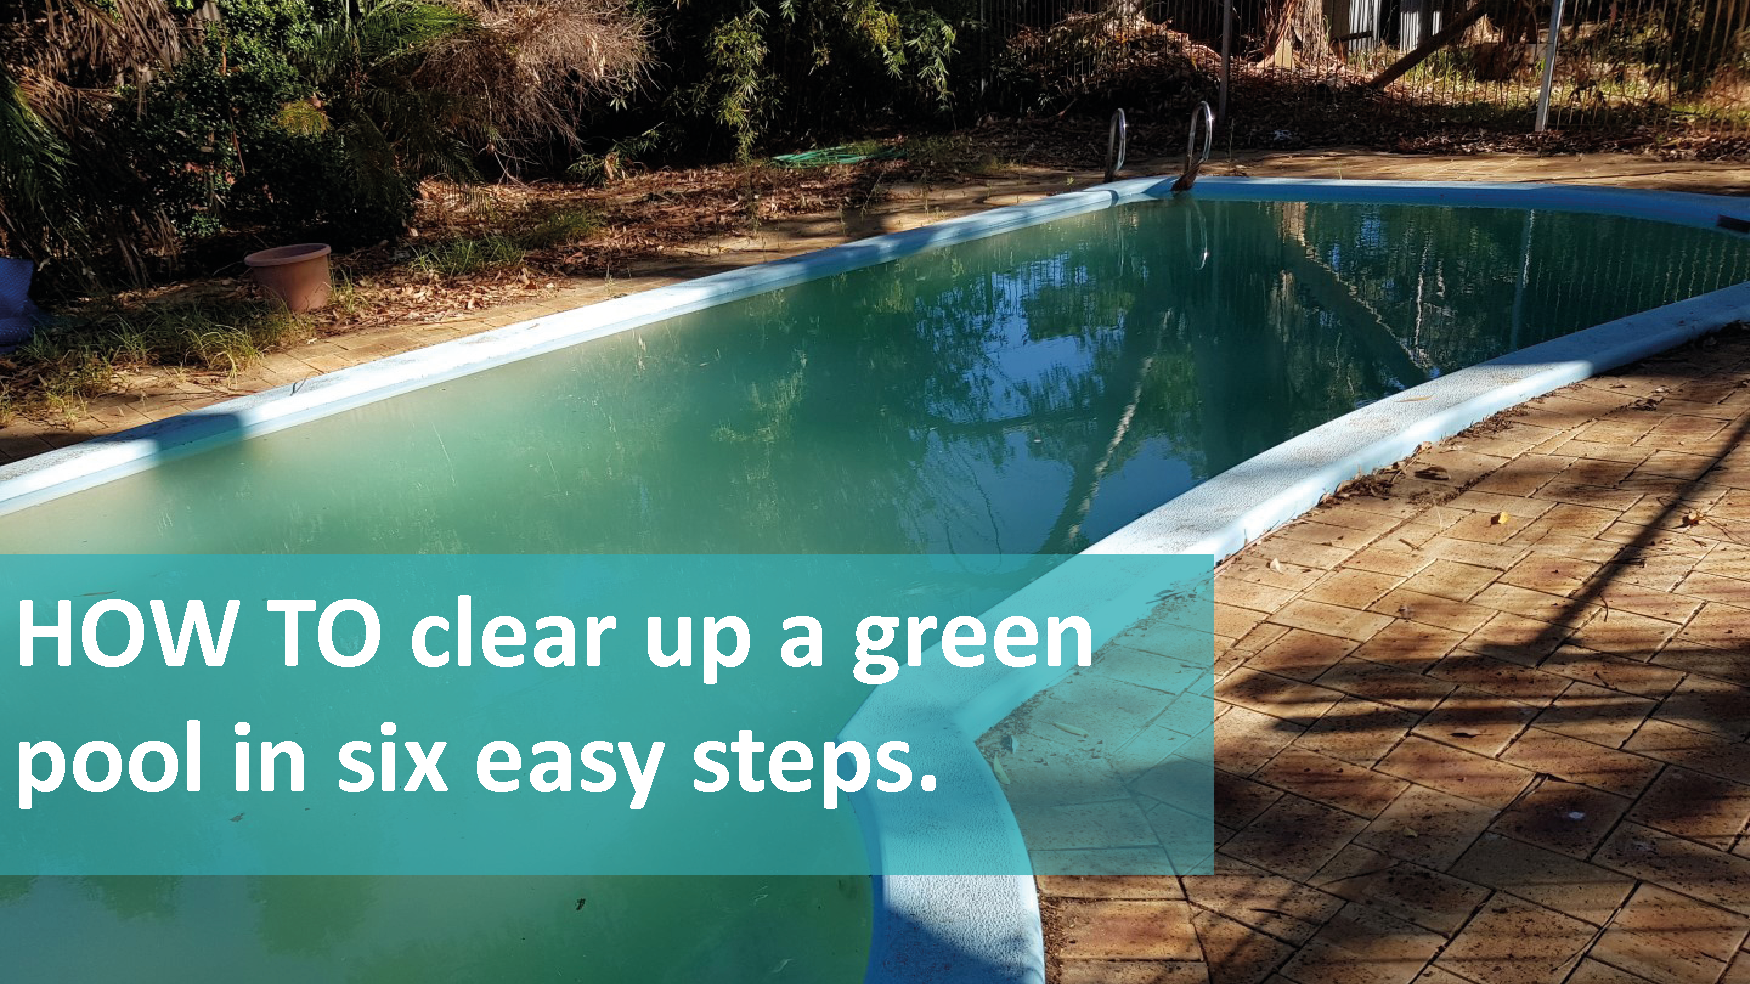 How to clear up a green pool in six easy steps